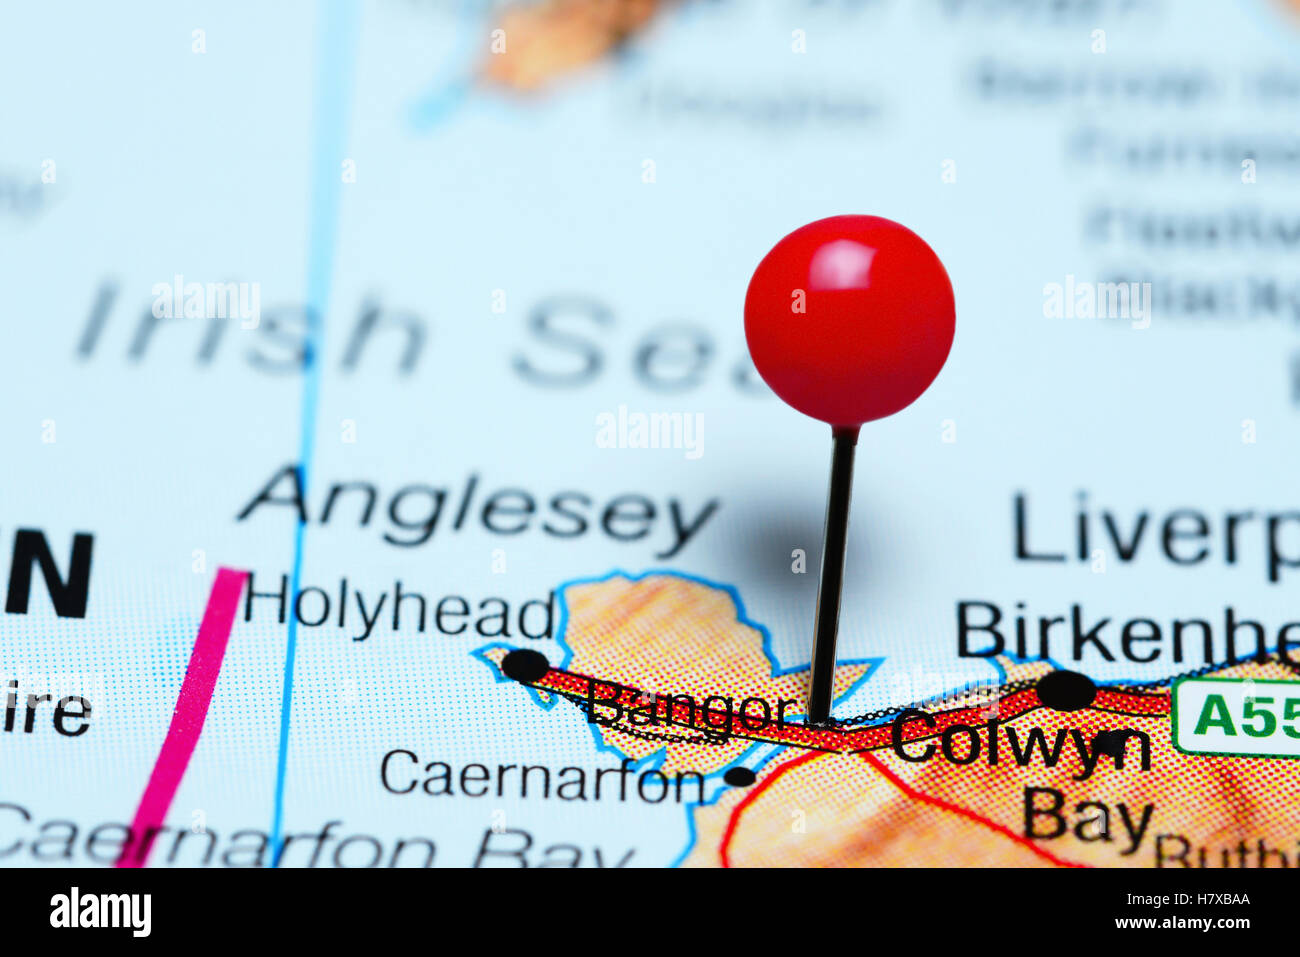 Bangor pinned on a map of Wales Stock Photo